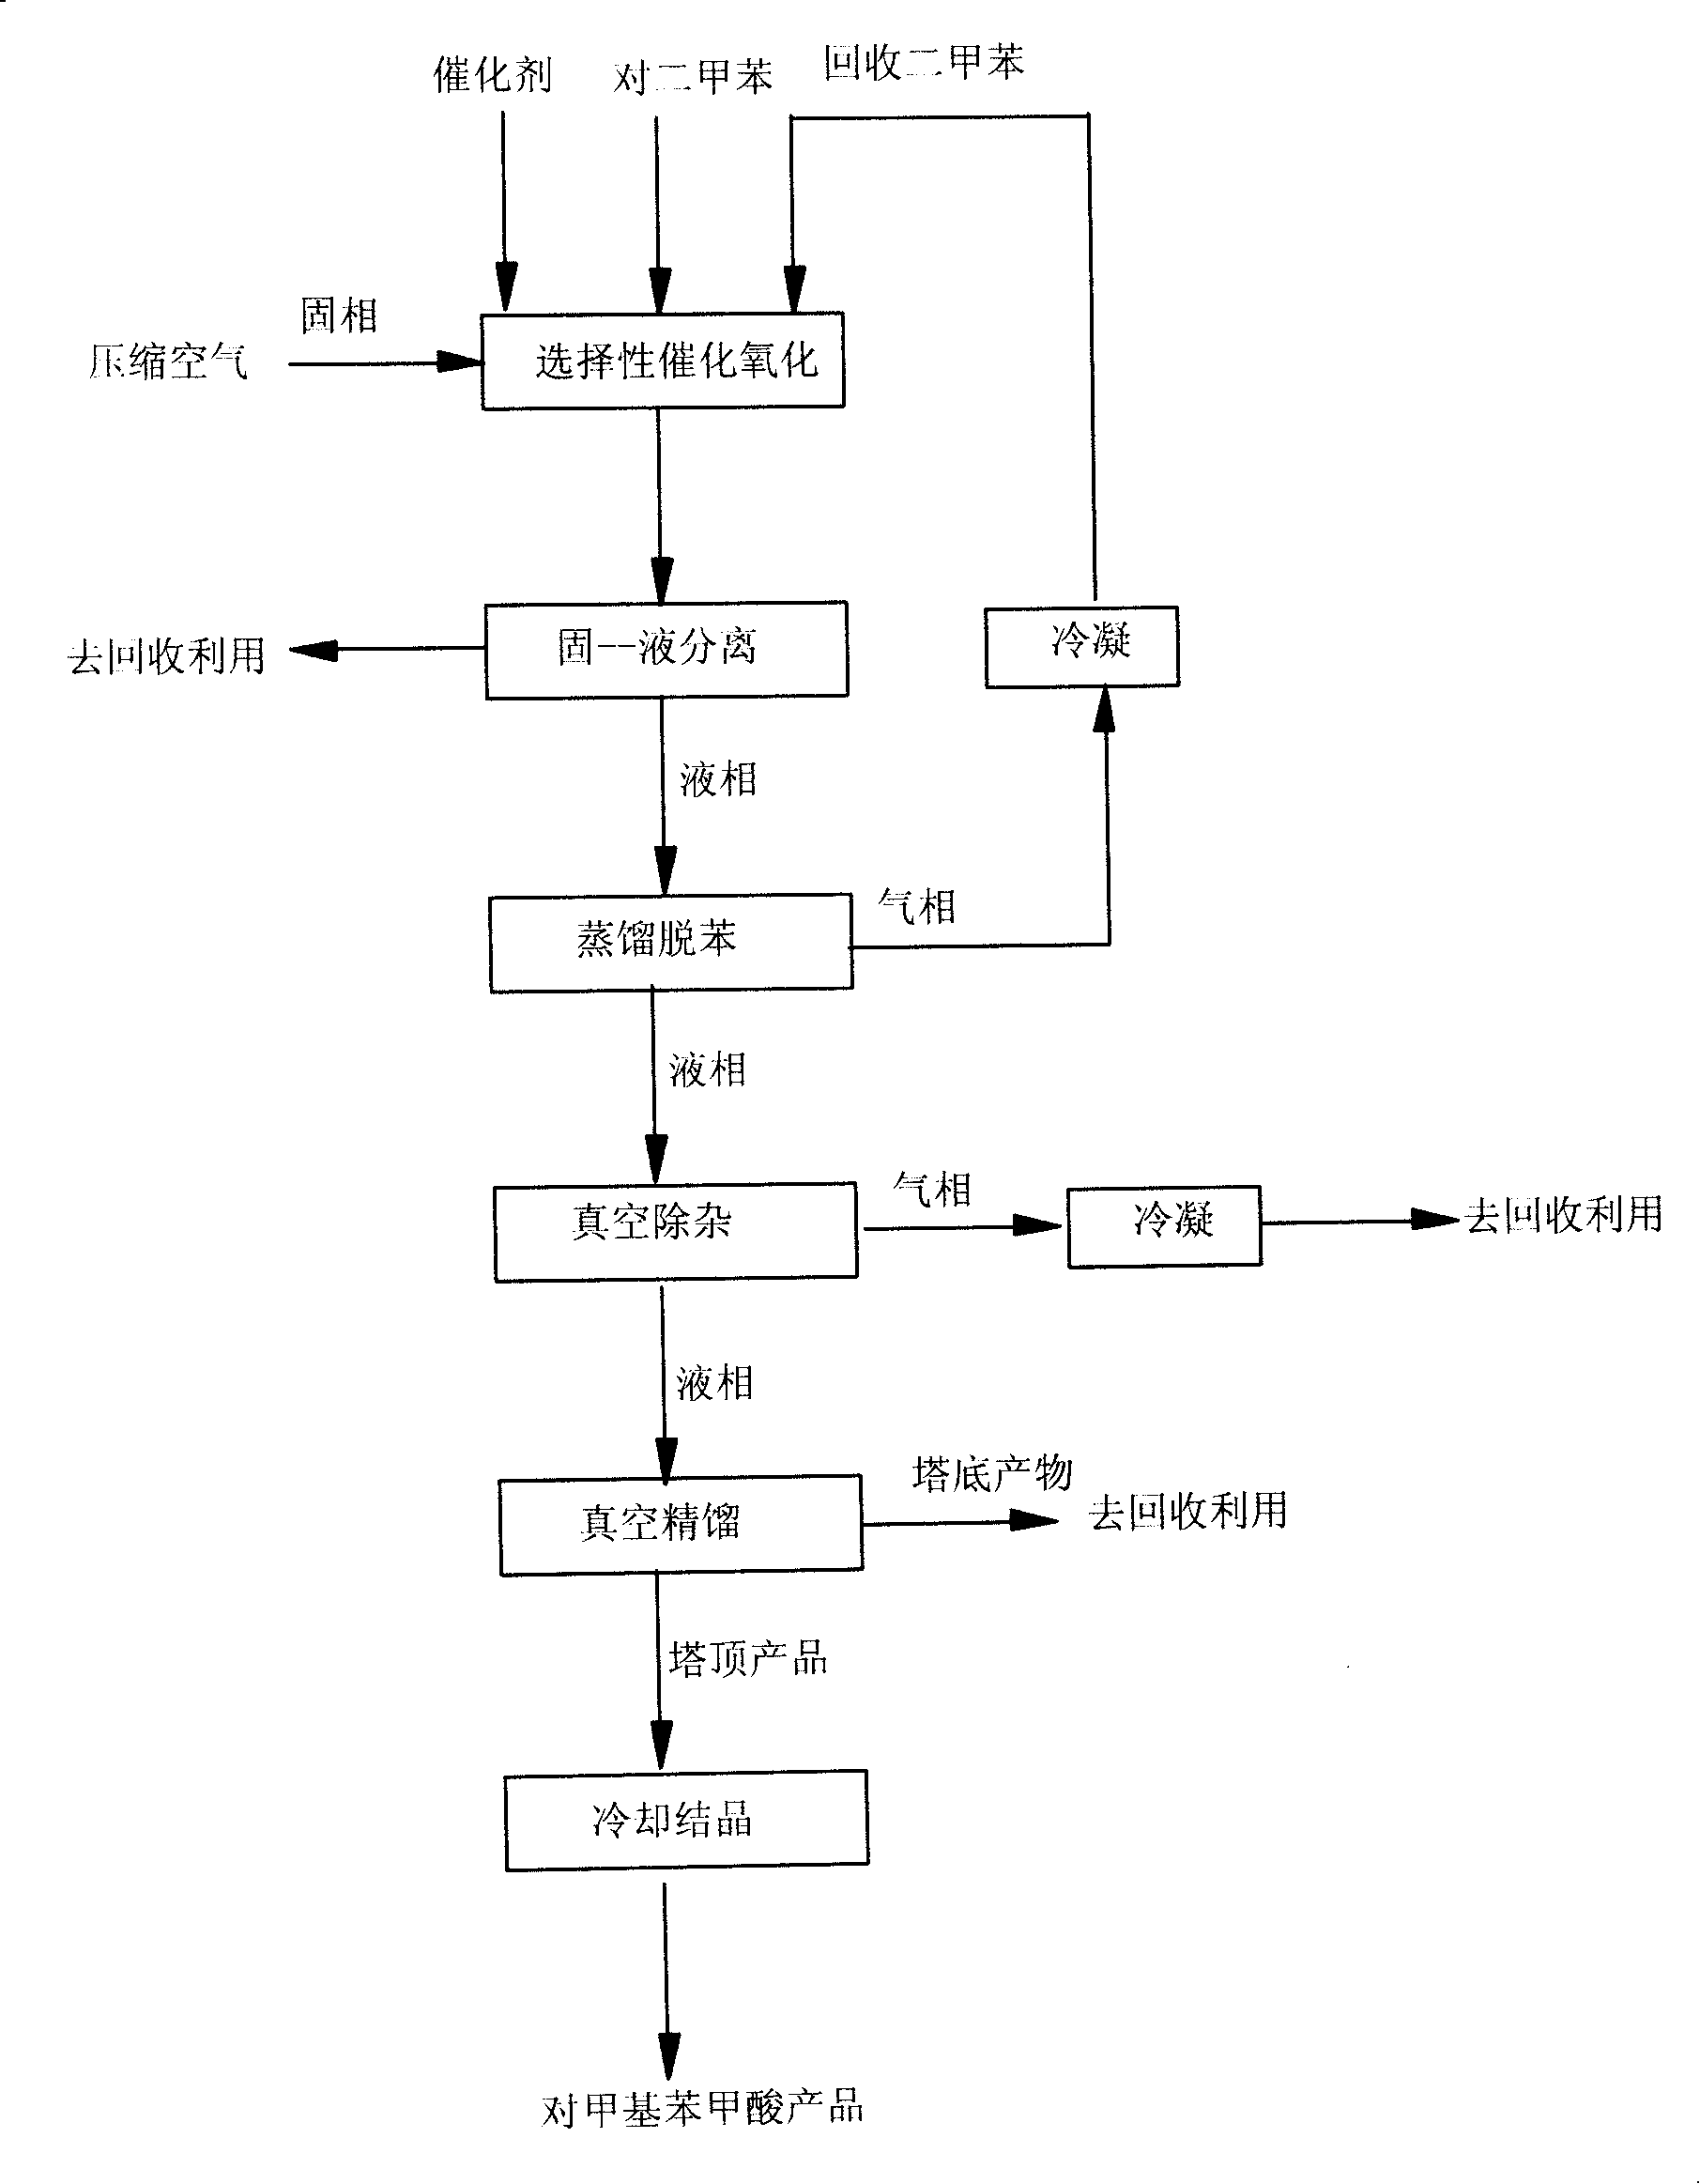 Process for producing methyl benzoic acid by paraxylene